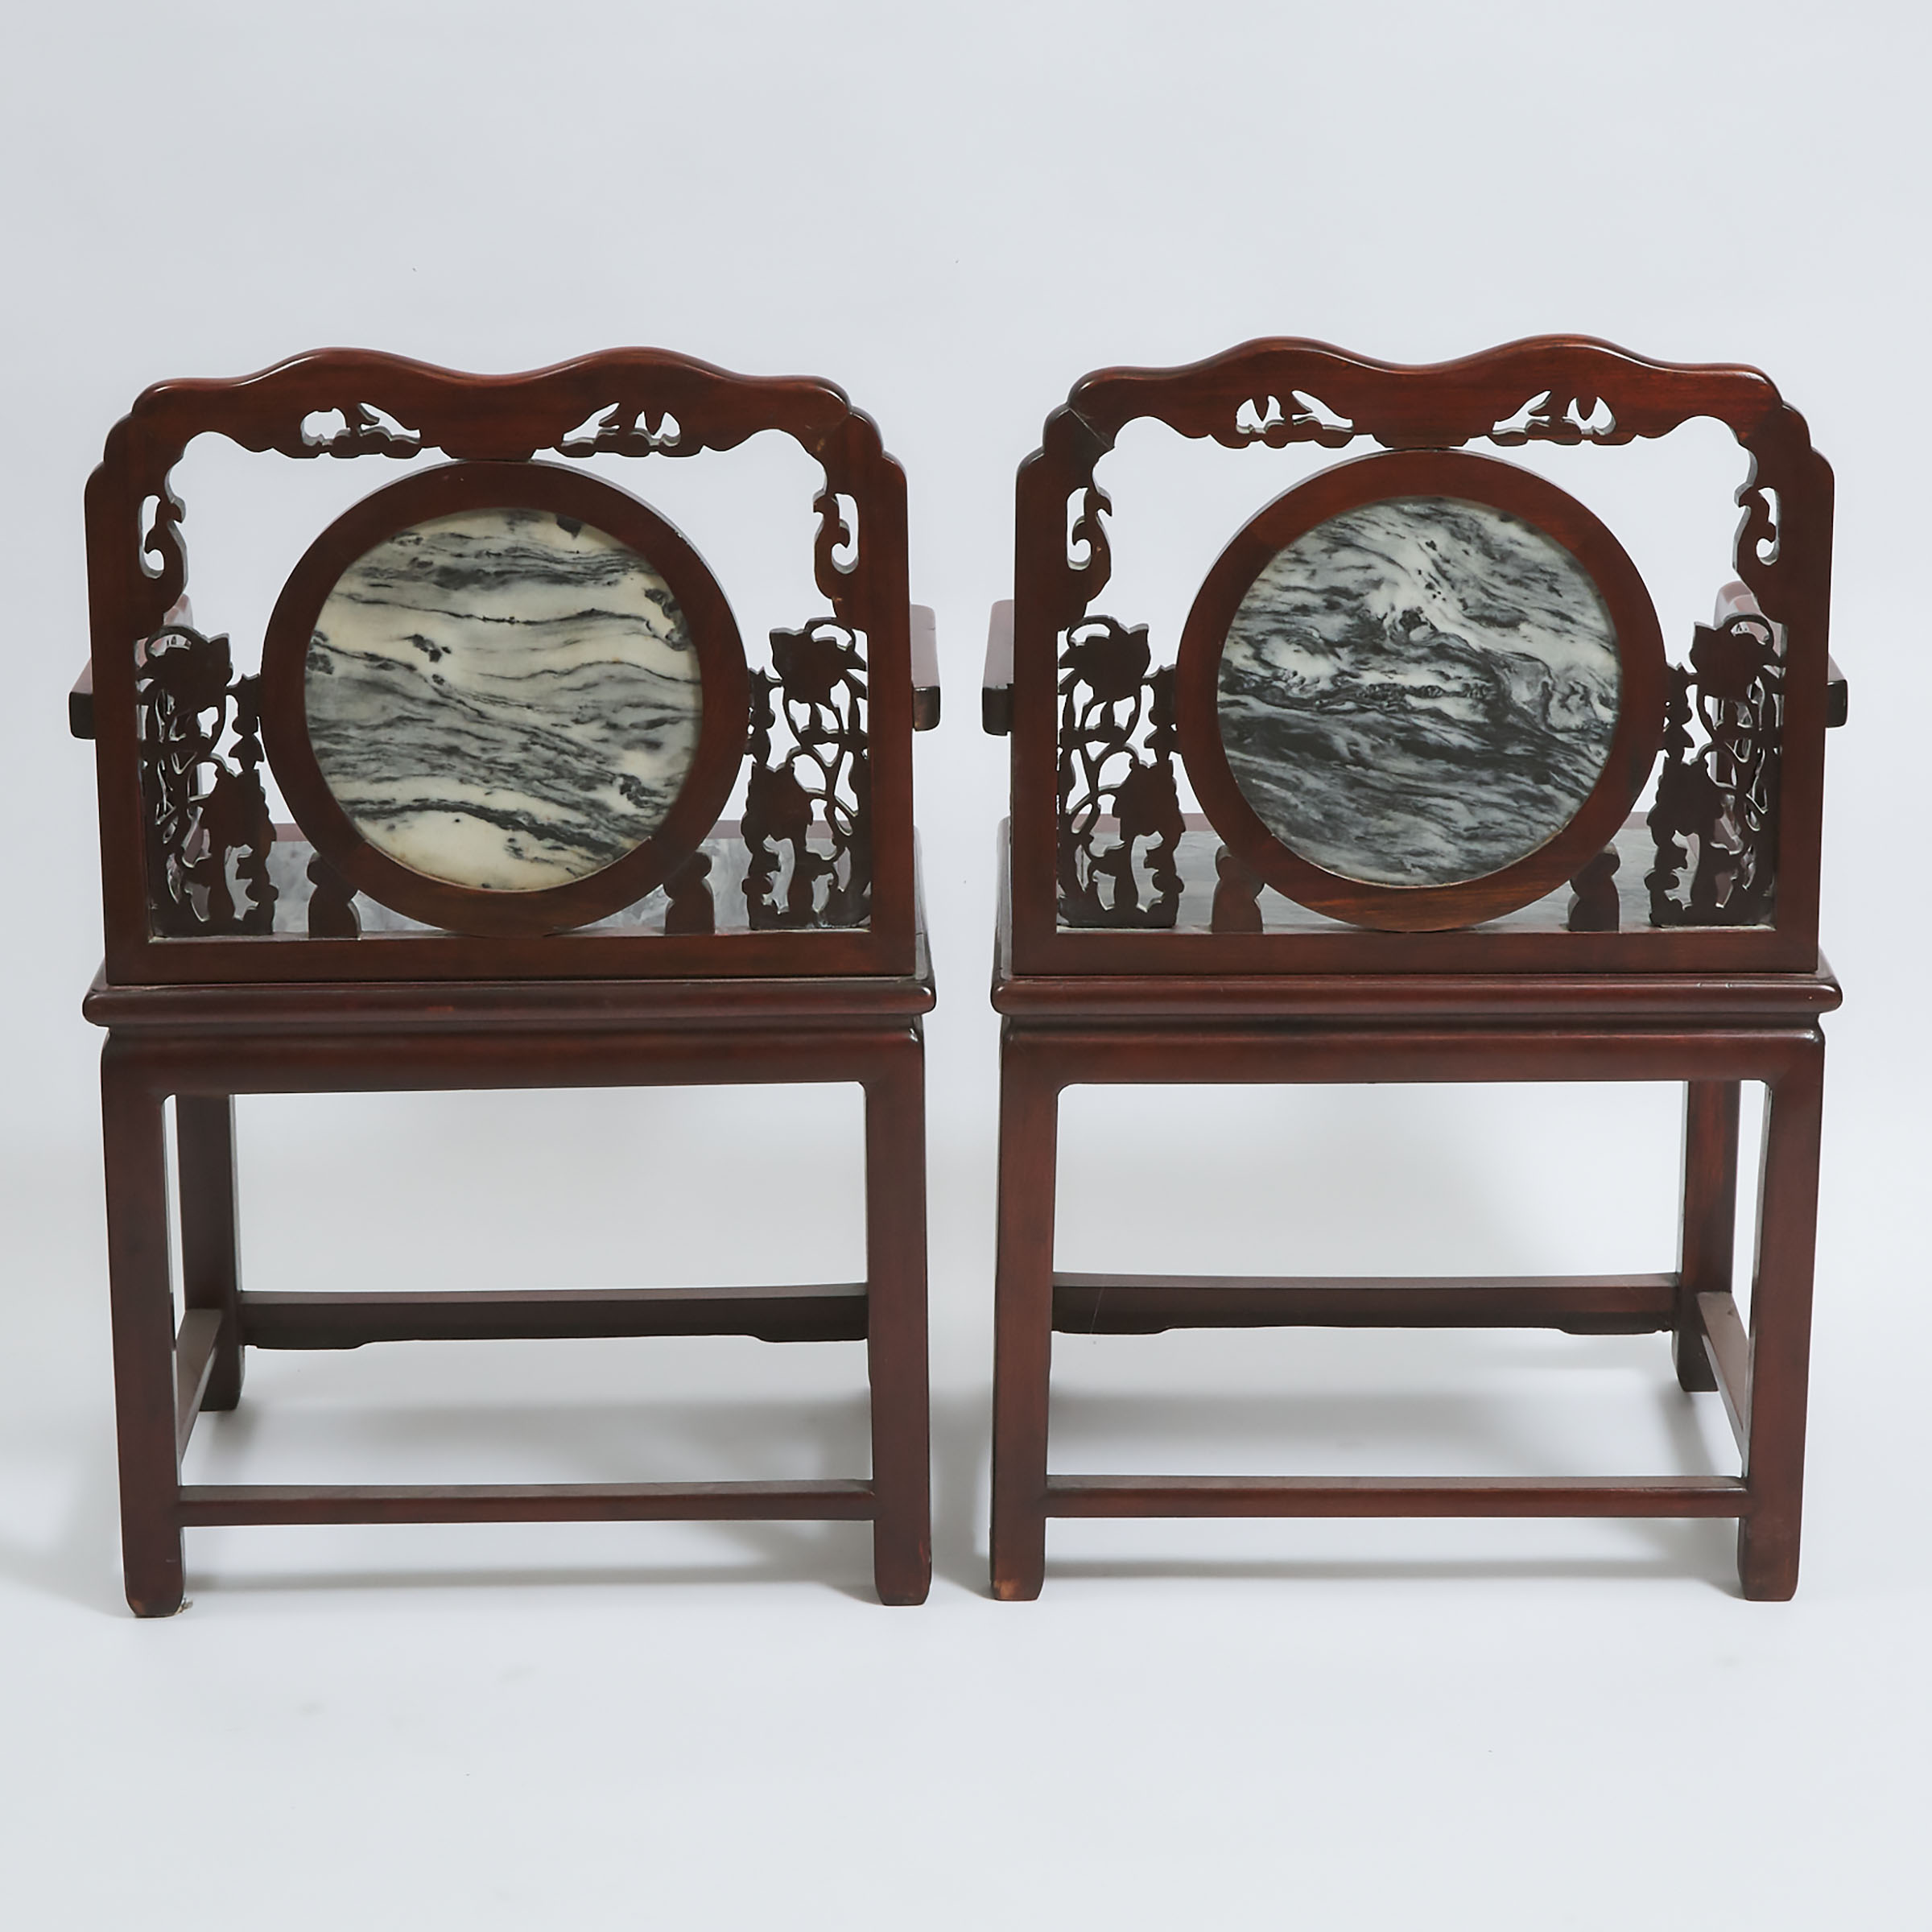 A Pair of Chinese Marble-Inset Rosewood Chairs, Mid 20th Century